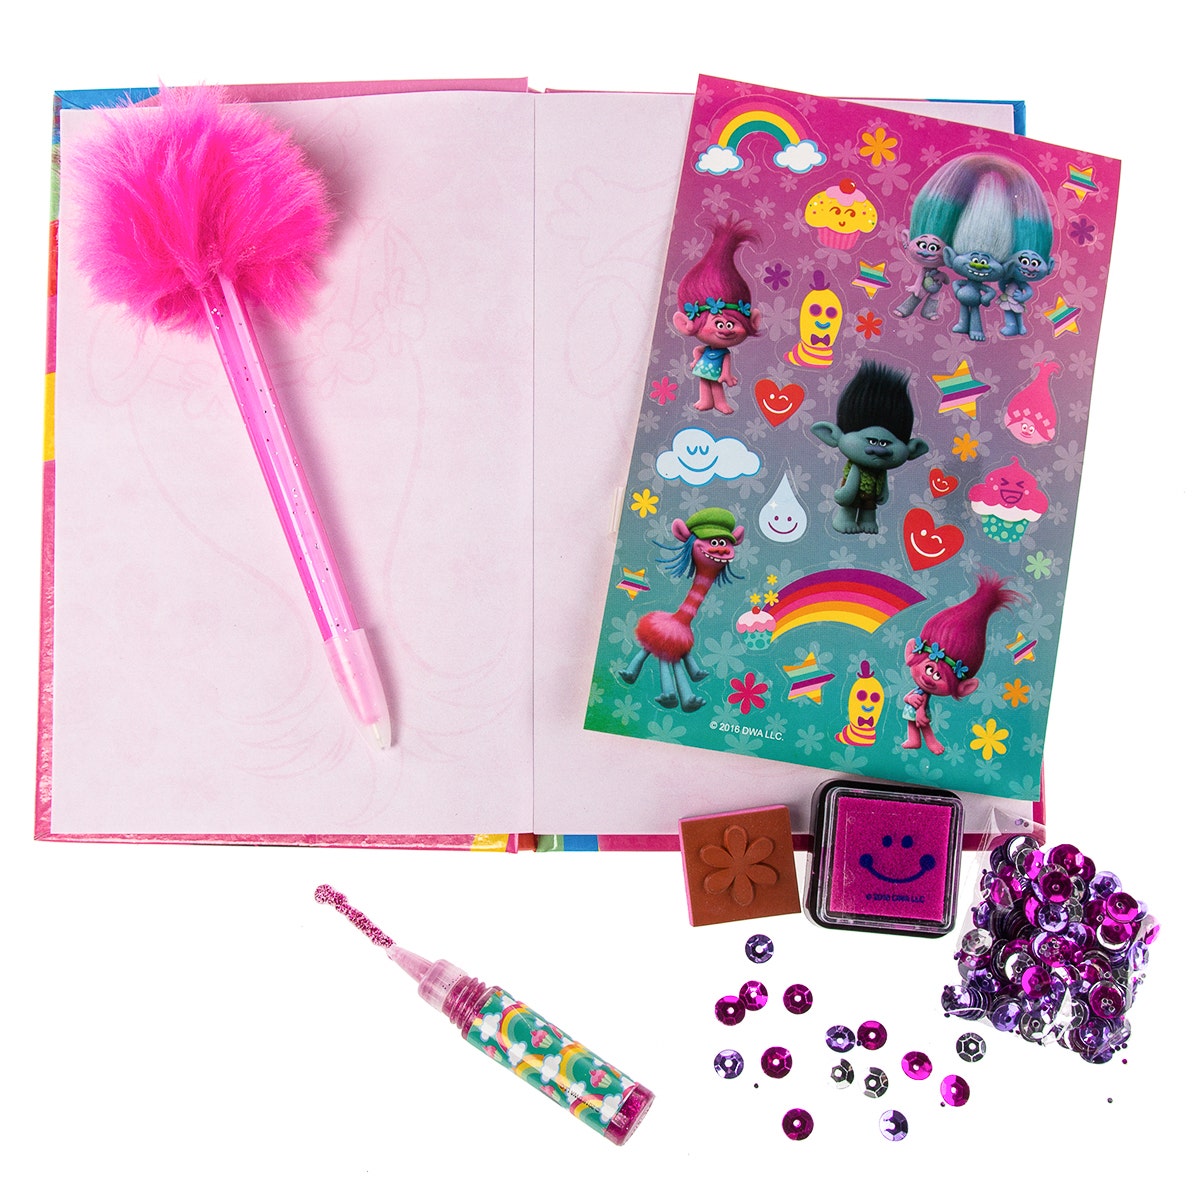 Kids Stationery & Diary Sticker Stamp Gift Sets - Fun Characters!